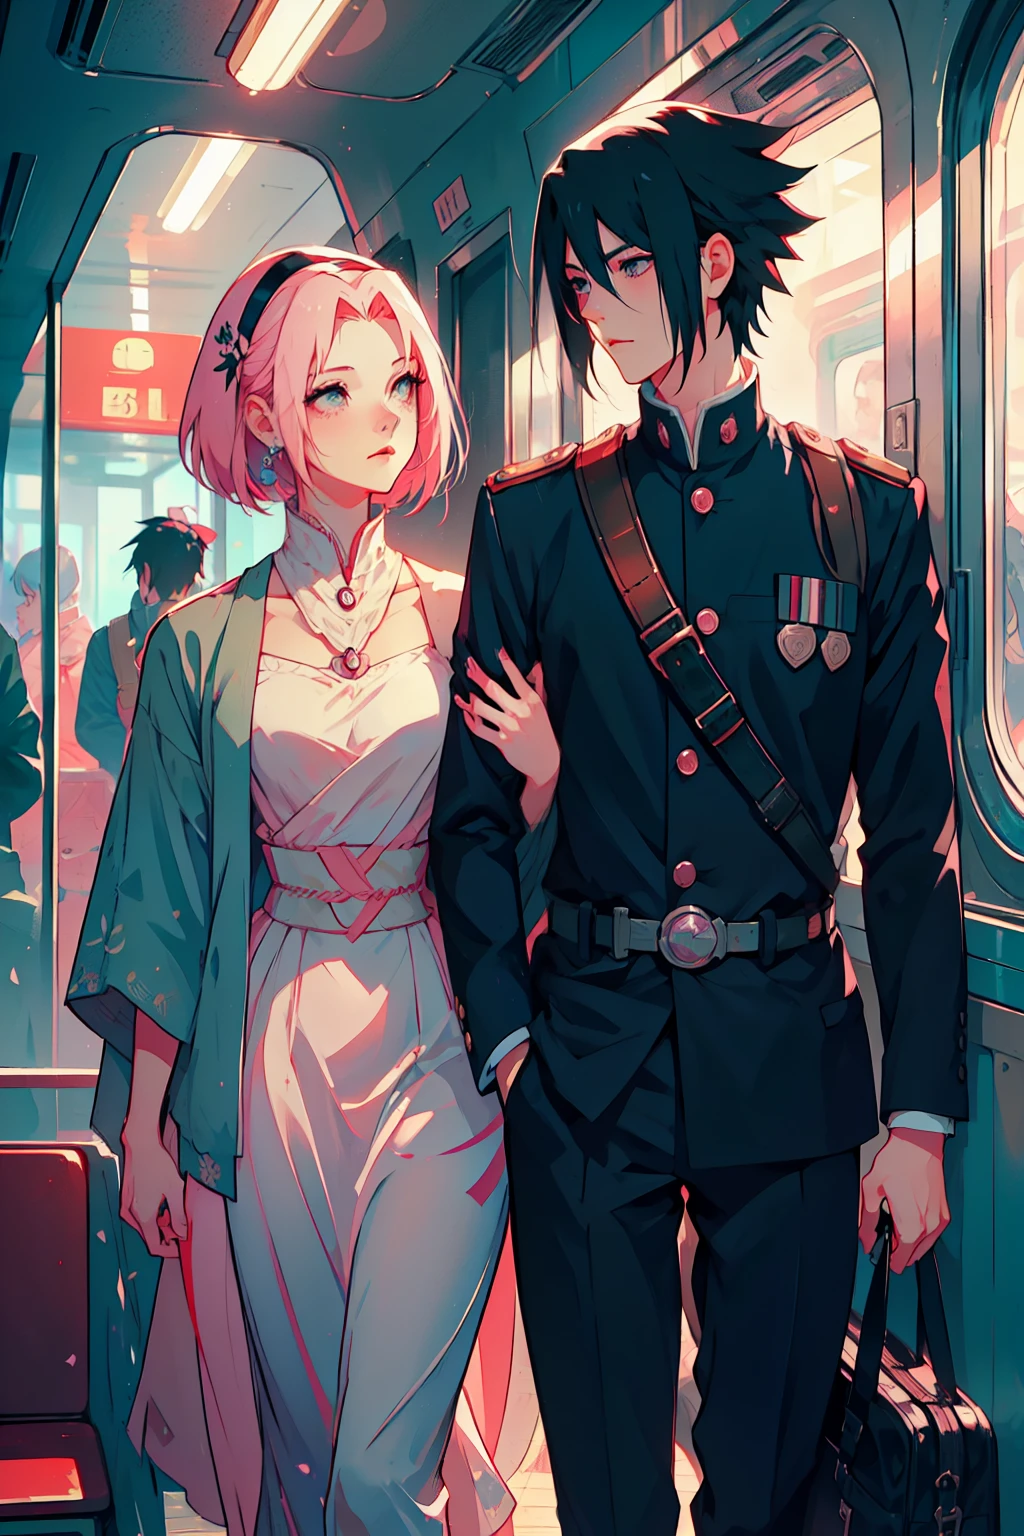 Sasusaku The couple in the photo is deeply in love and lost in the moment. Sasuke, the tall, handsome man with chiseled features and piercing black eyes. He has a confident and charismatic demeanor, and his love for the woman is evident in the way he looks at her wistful adoration. He is wearing a military uniform, he is a soldier. The woman is equally stunning with soft features and delicate features, her hair is short and pink that falls elegantly around her face, adding to her romantic and dreamy appearance. She's wearing a 1950s ensemble. The couple is saying goodbye on a train line, he's going to war.